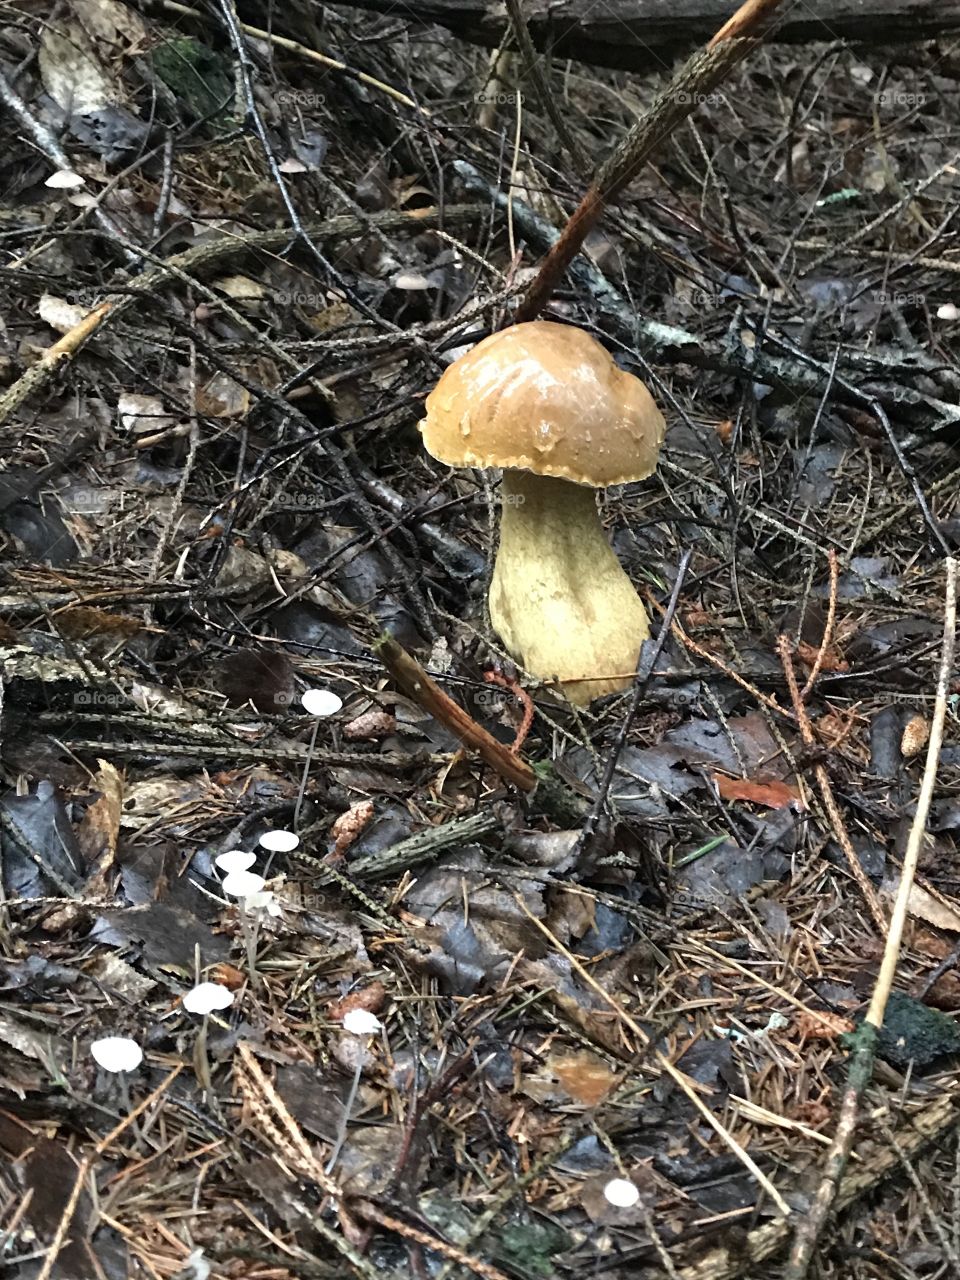 Wild cep mushroom in the forest